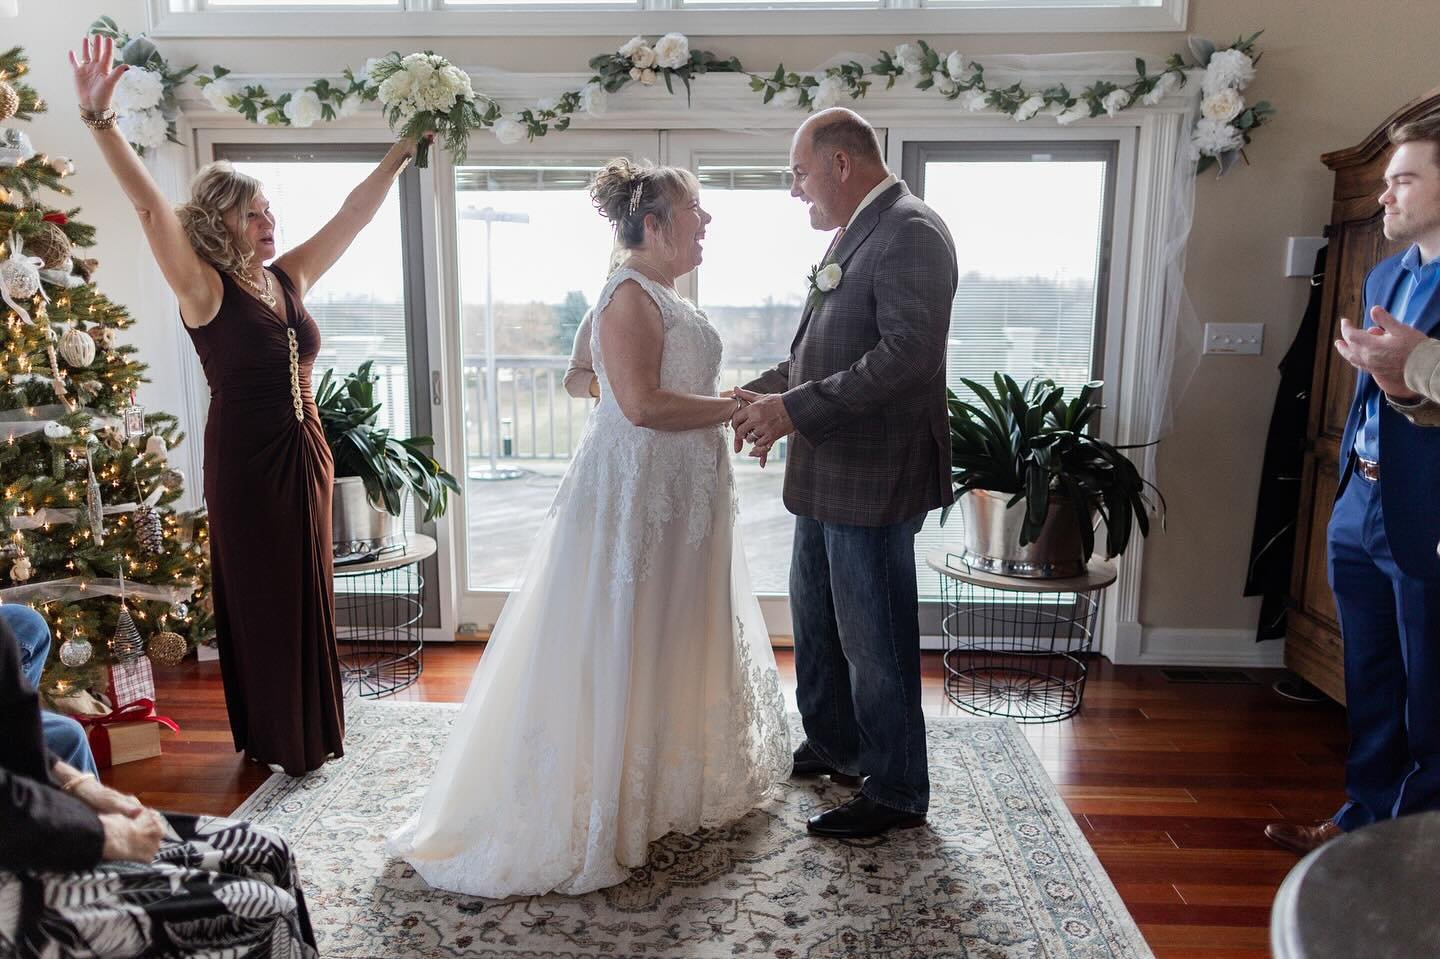 Getting to shoot &amp; share wedding days with people is always such an honor. There isn&rsquo;t a moment that passes on wedding days that I&rsquo;m not forever grateful to do what I do